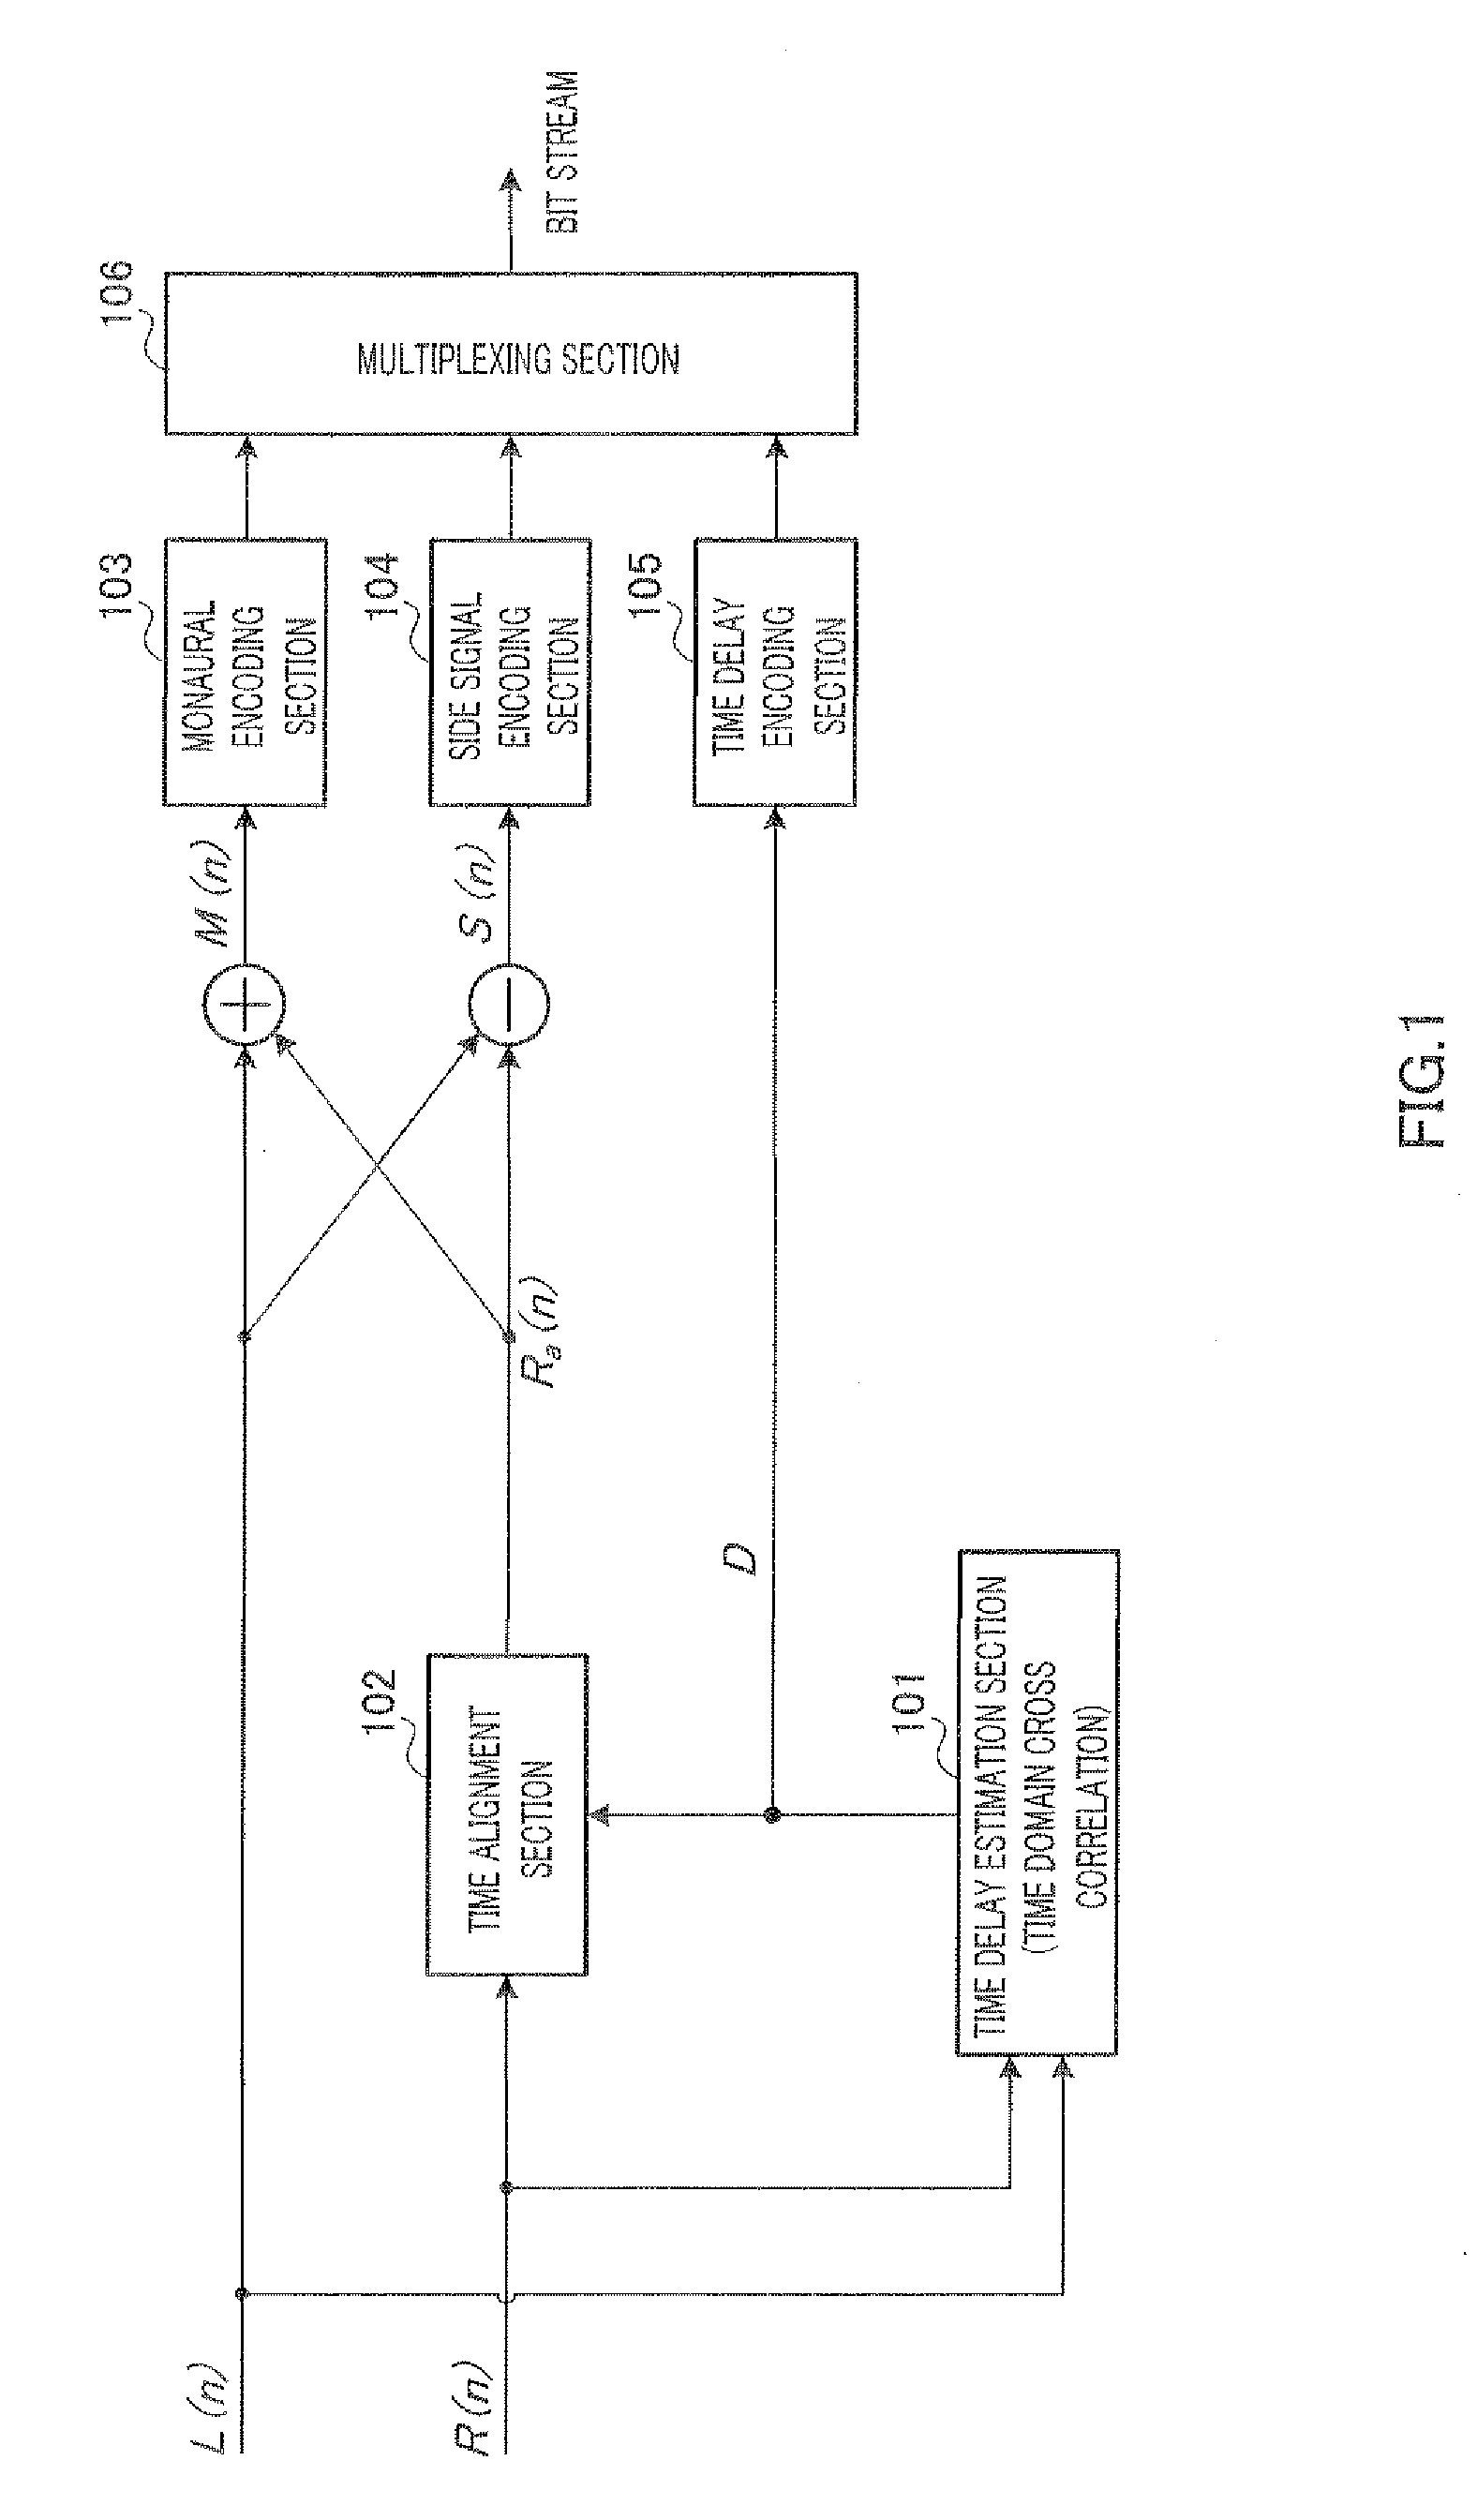 Stereo acoustic signal encoding apparatus, stereo acoustic signal decoding apparatus, and methods for the same